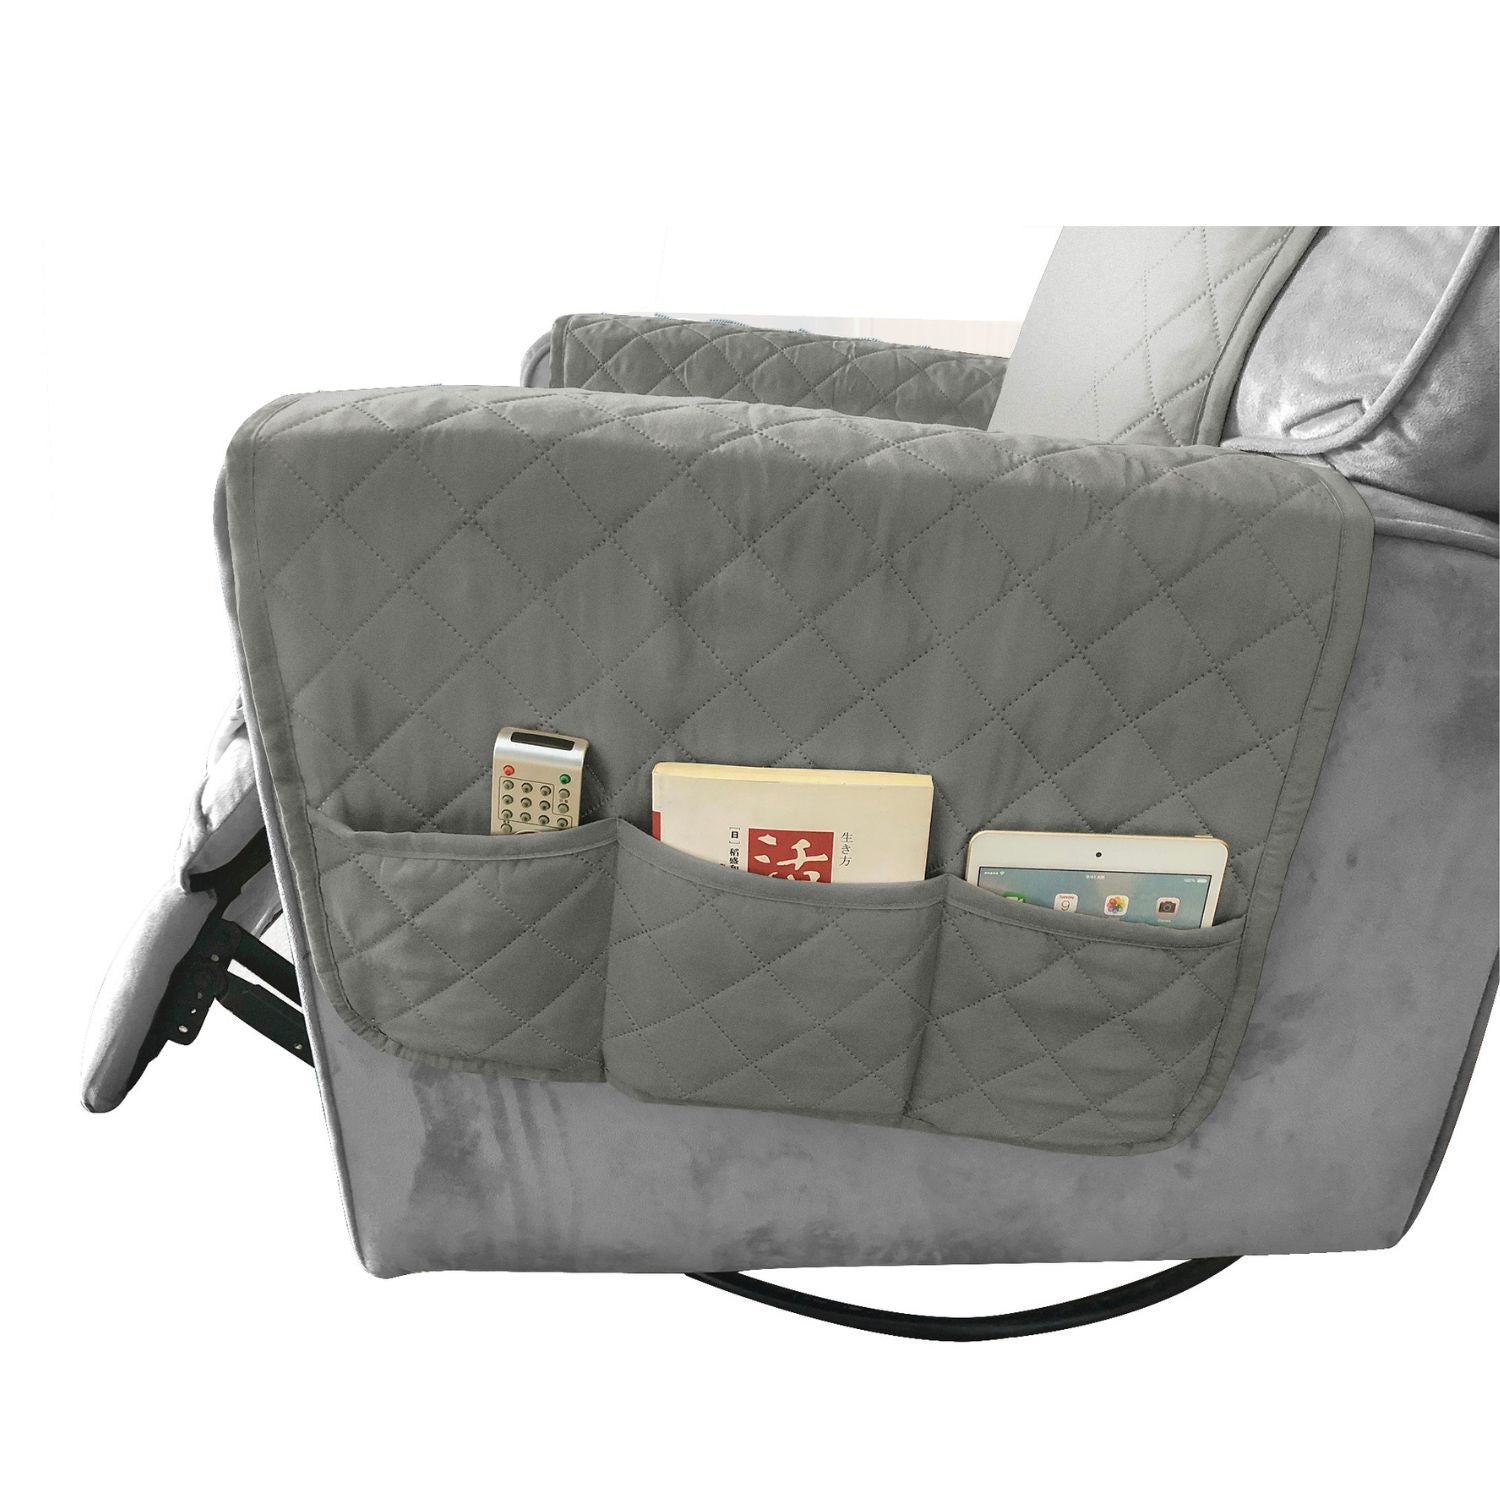 FLOOFI Pet Sofa Cover Recliner Chair S Size with Pocket (Light Grey)